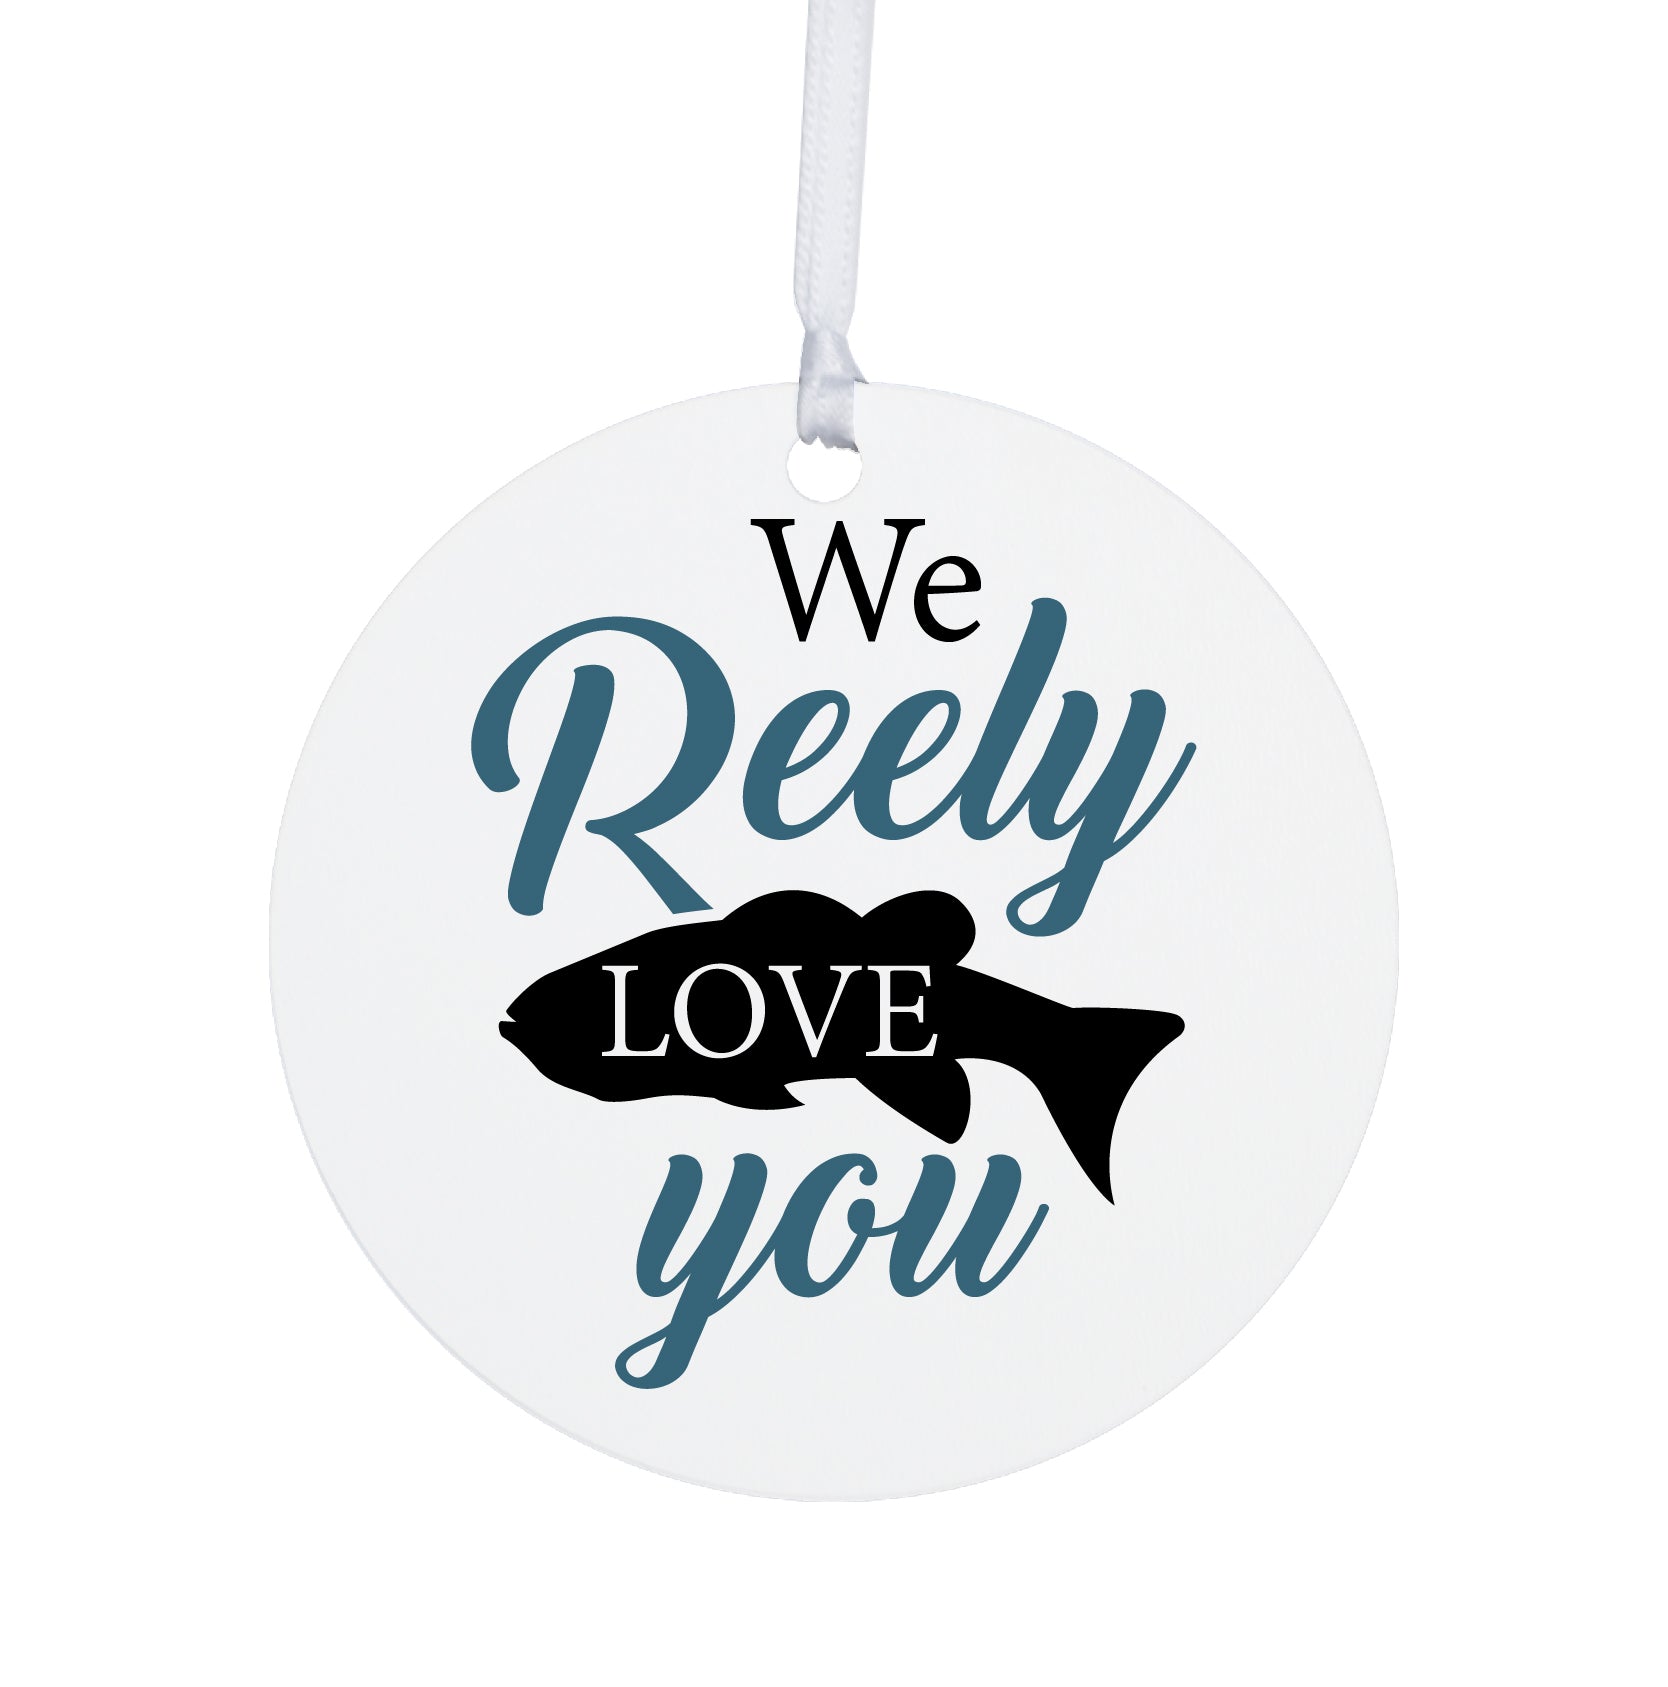 Fishing Dad White Ornament With Inspirational Message Gift Ideas - We Reely Love You! - LifeSong Milestones